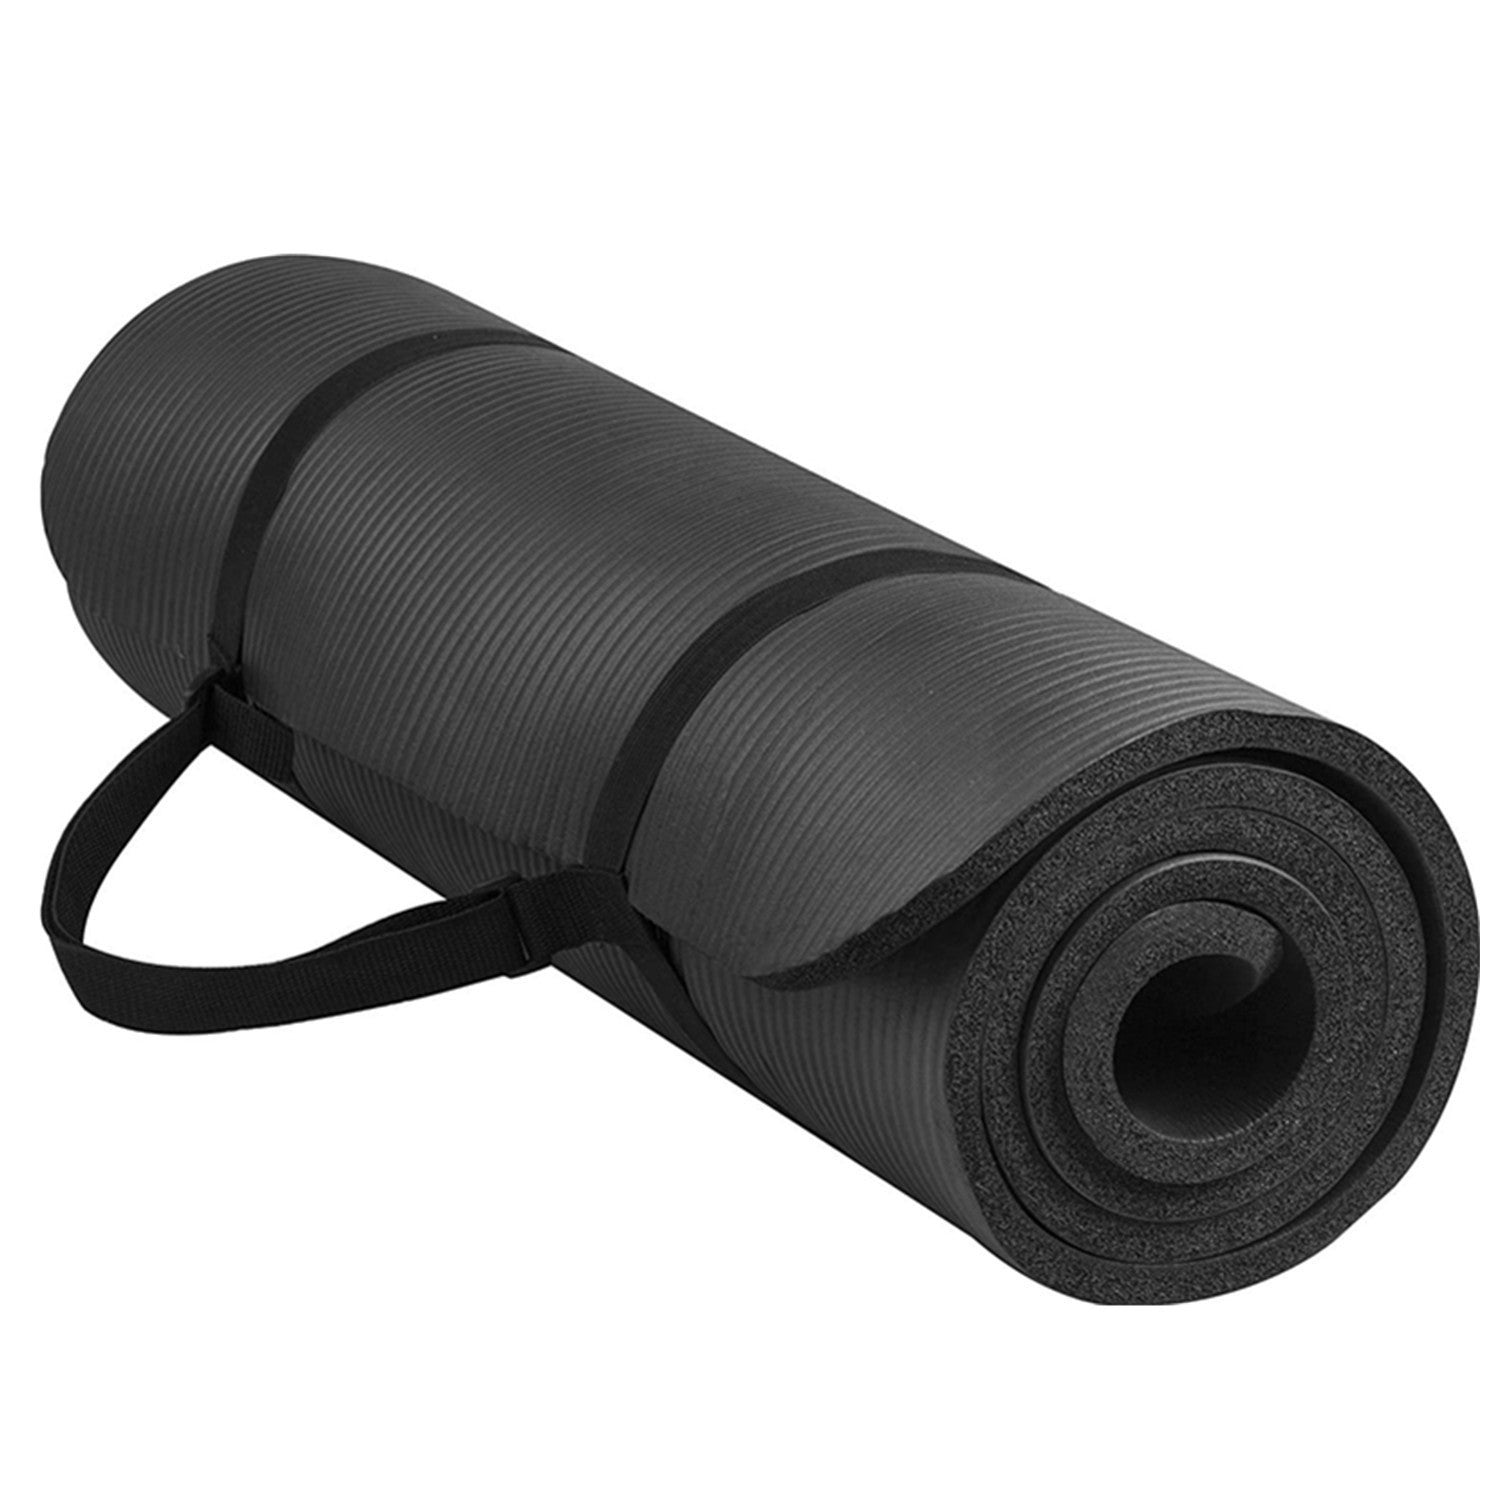 Yoga Mat, All-Purpose Exercise Yoga Mat, High Density Anti-Tear Exercise Yoga Mat and Knee Pad with Carrying Strap